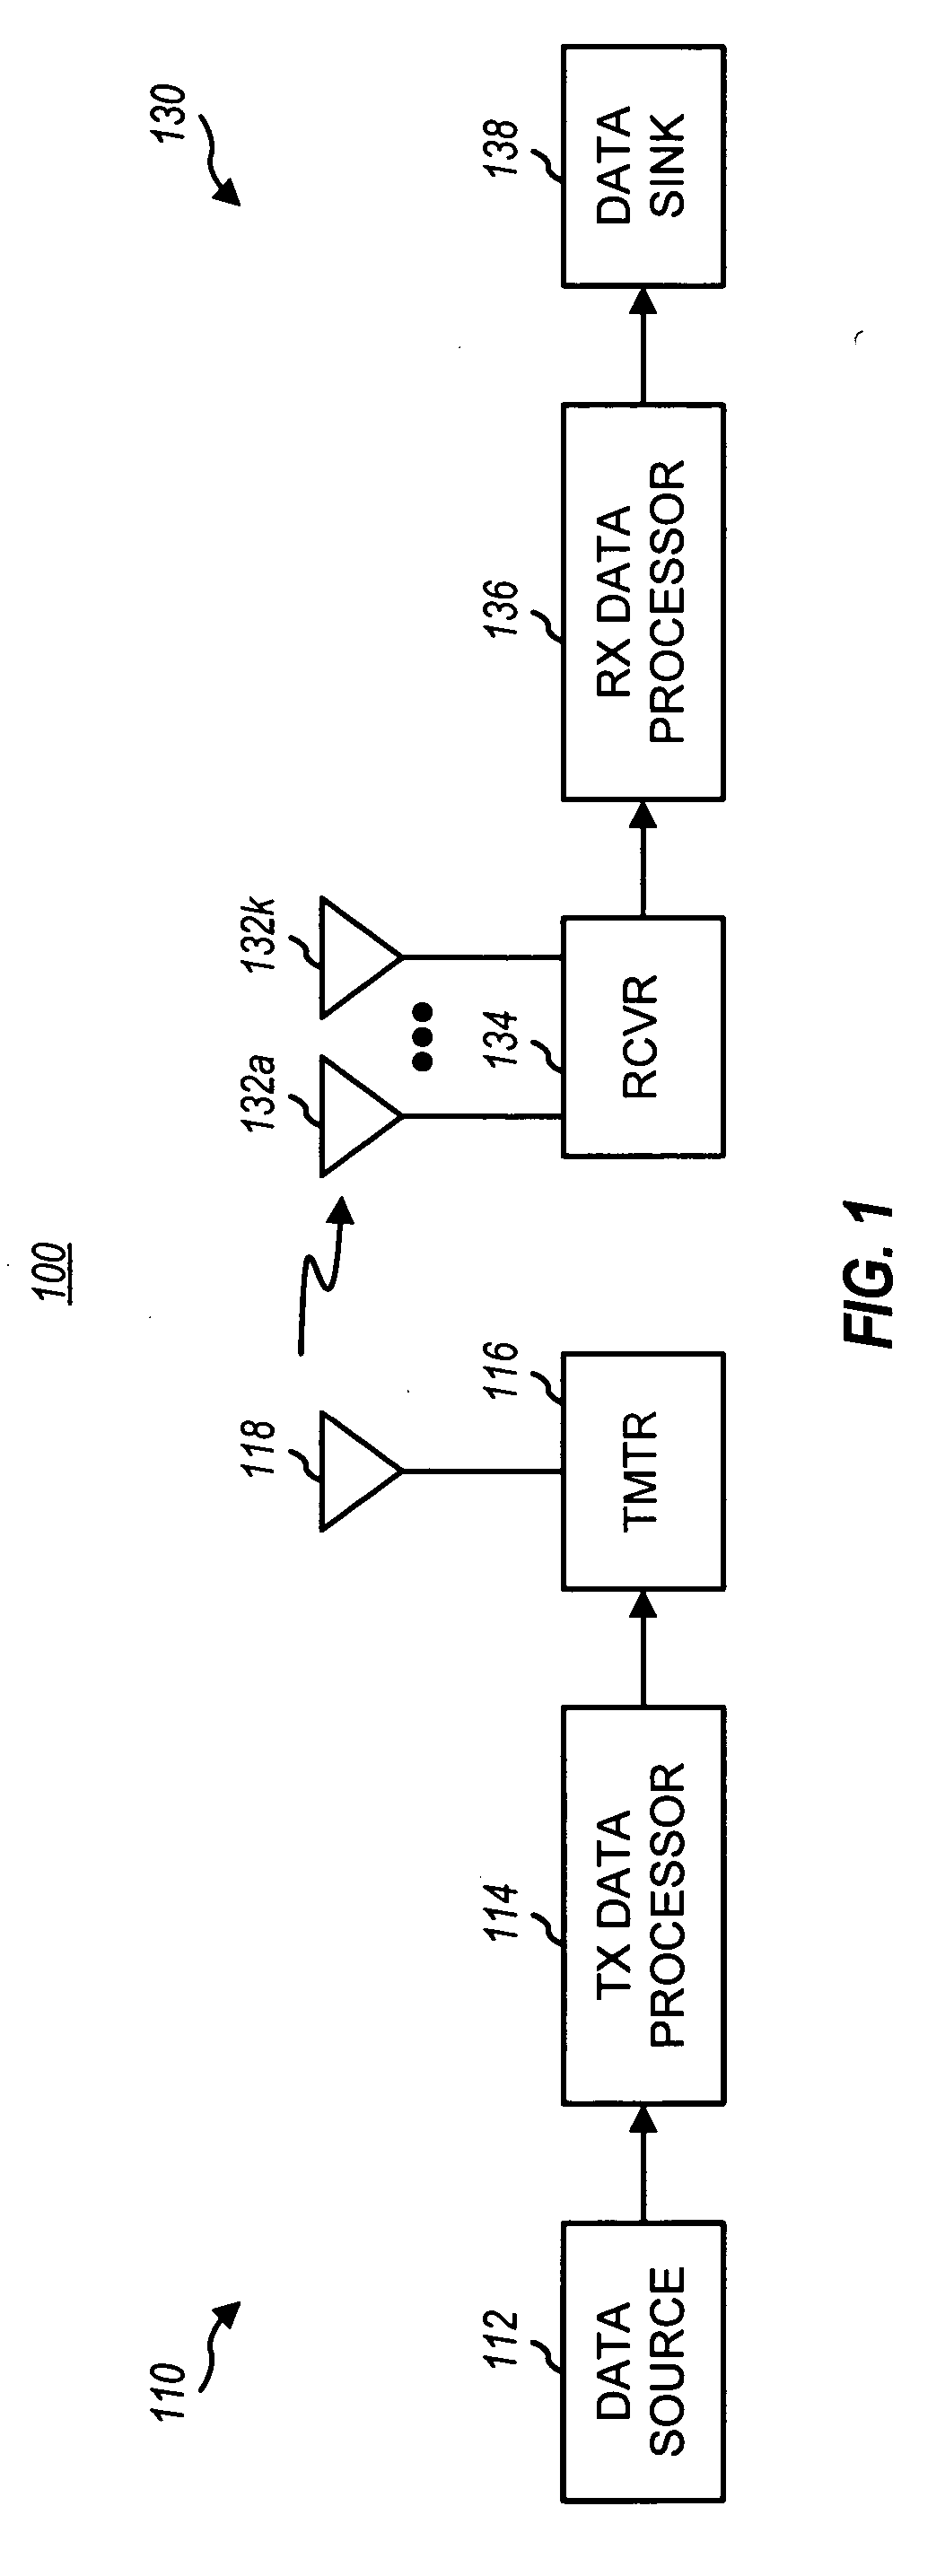 Method and apparatus for processing a modulated signal using an equalizer and a rake receiver